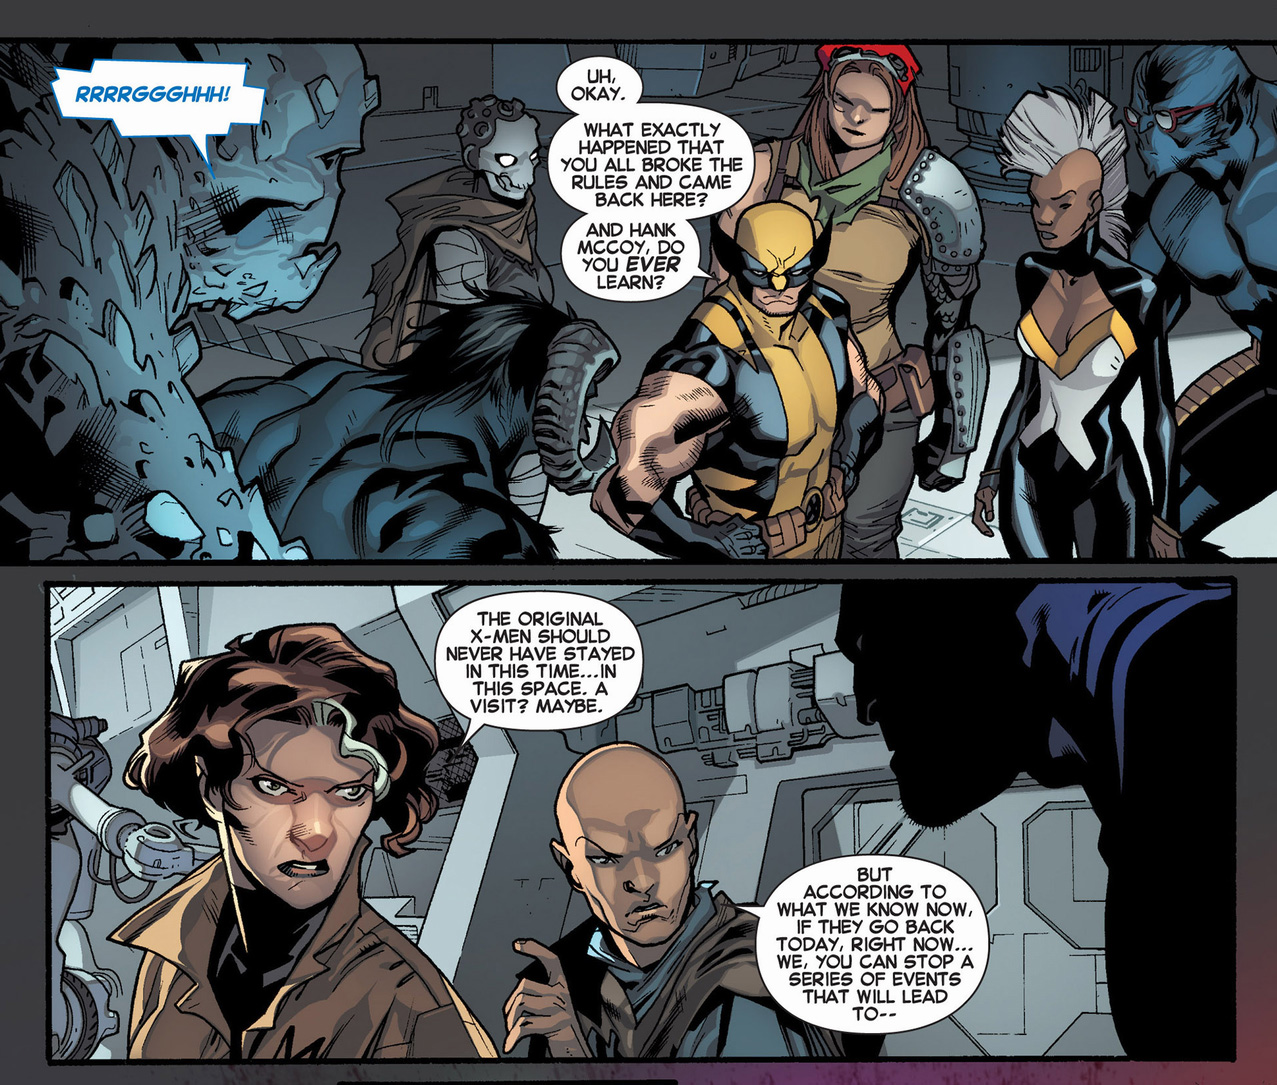 future x-men meets wolverine and the x-men